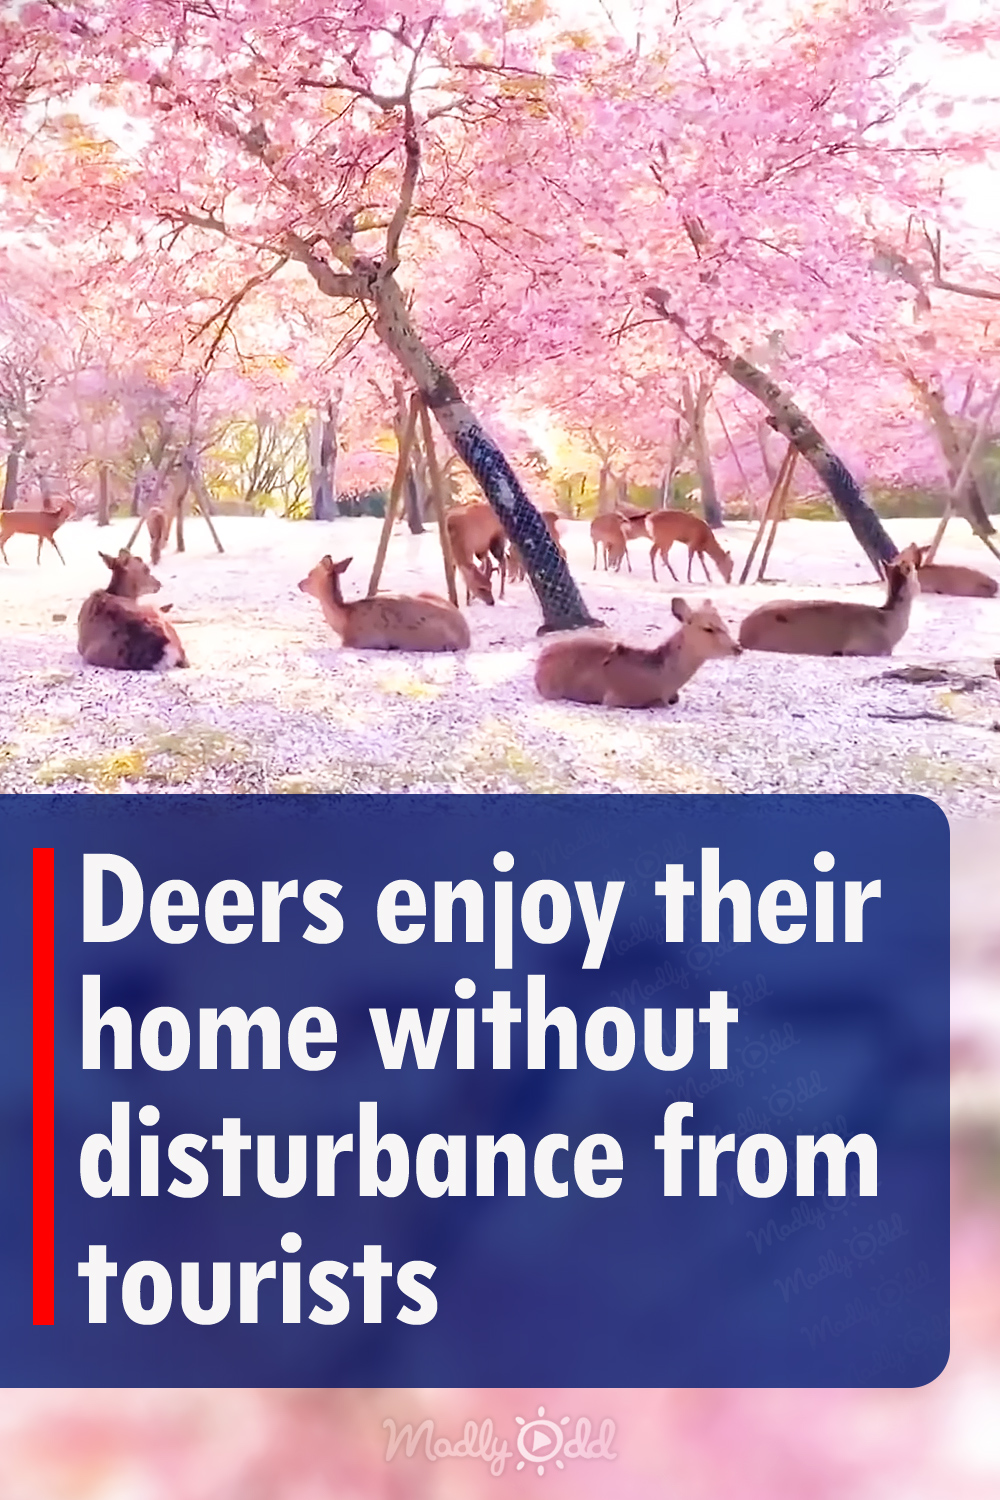 Deer enjoy their home without disturbance from tourists